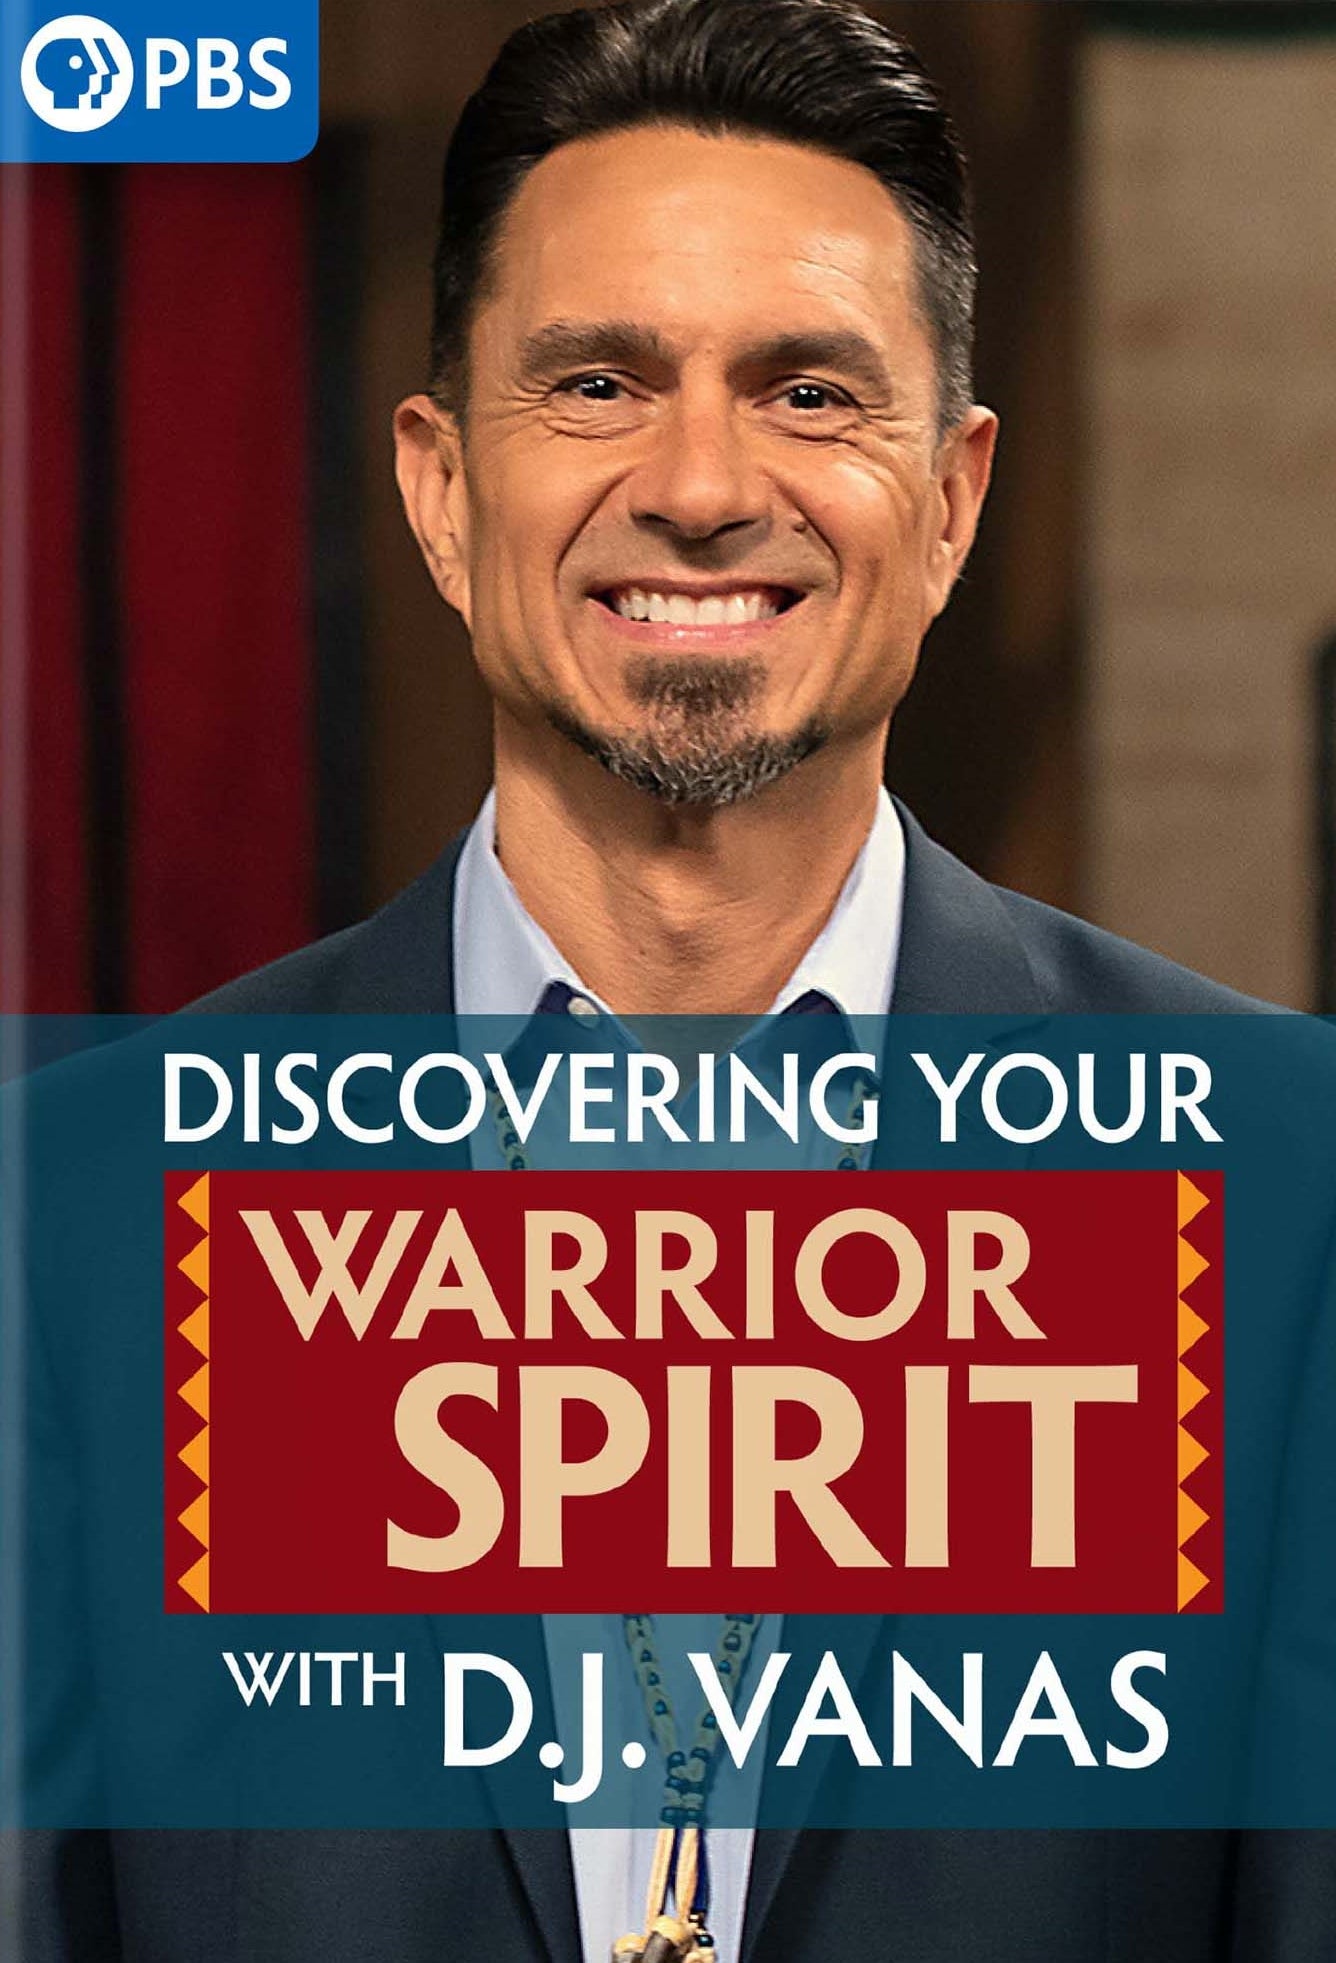 Discovering Your Warrior Spirit with D.J. Vanas cover art